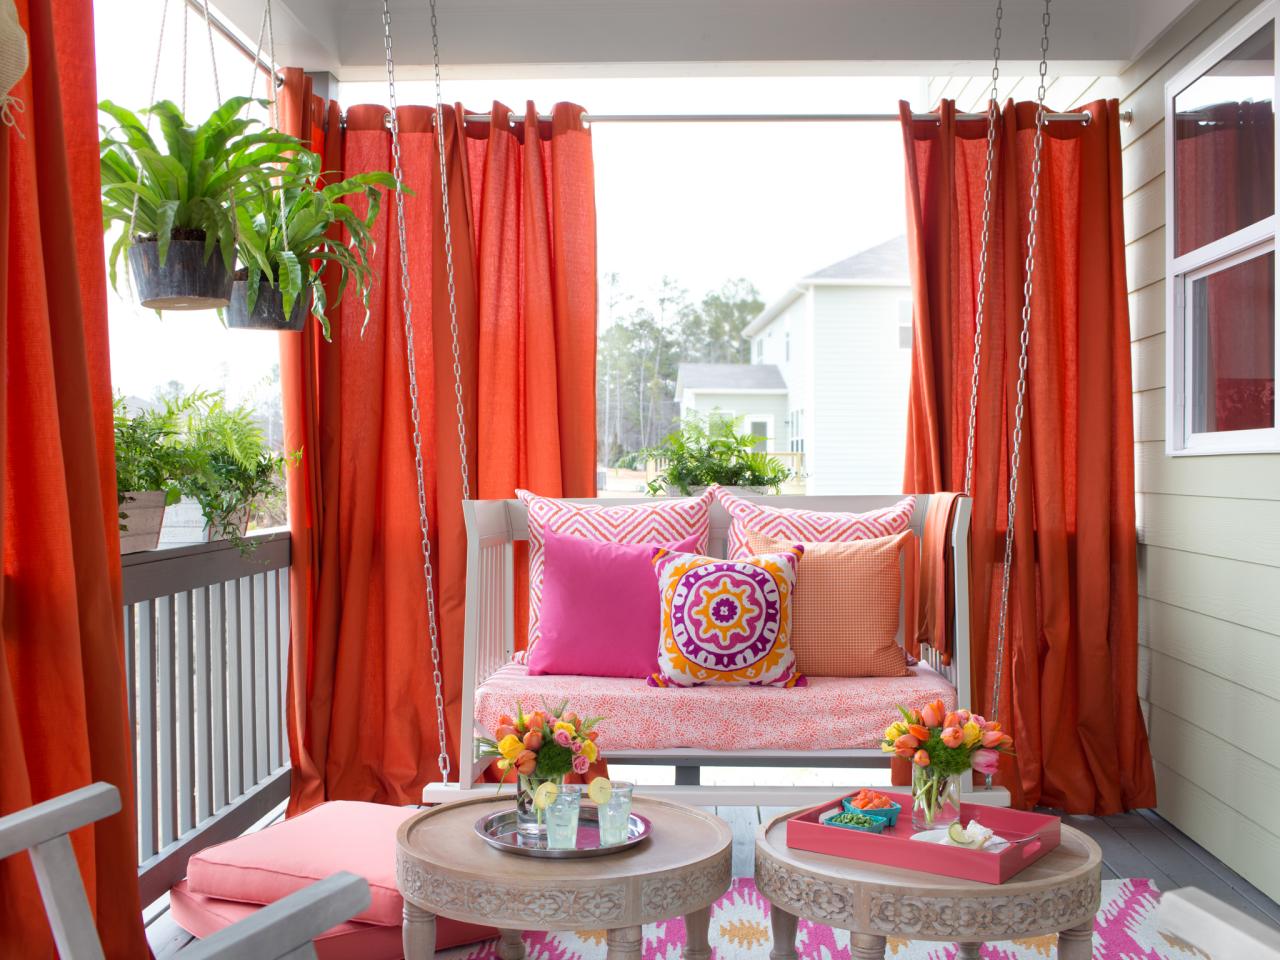 How To Hang Curtains On Porch